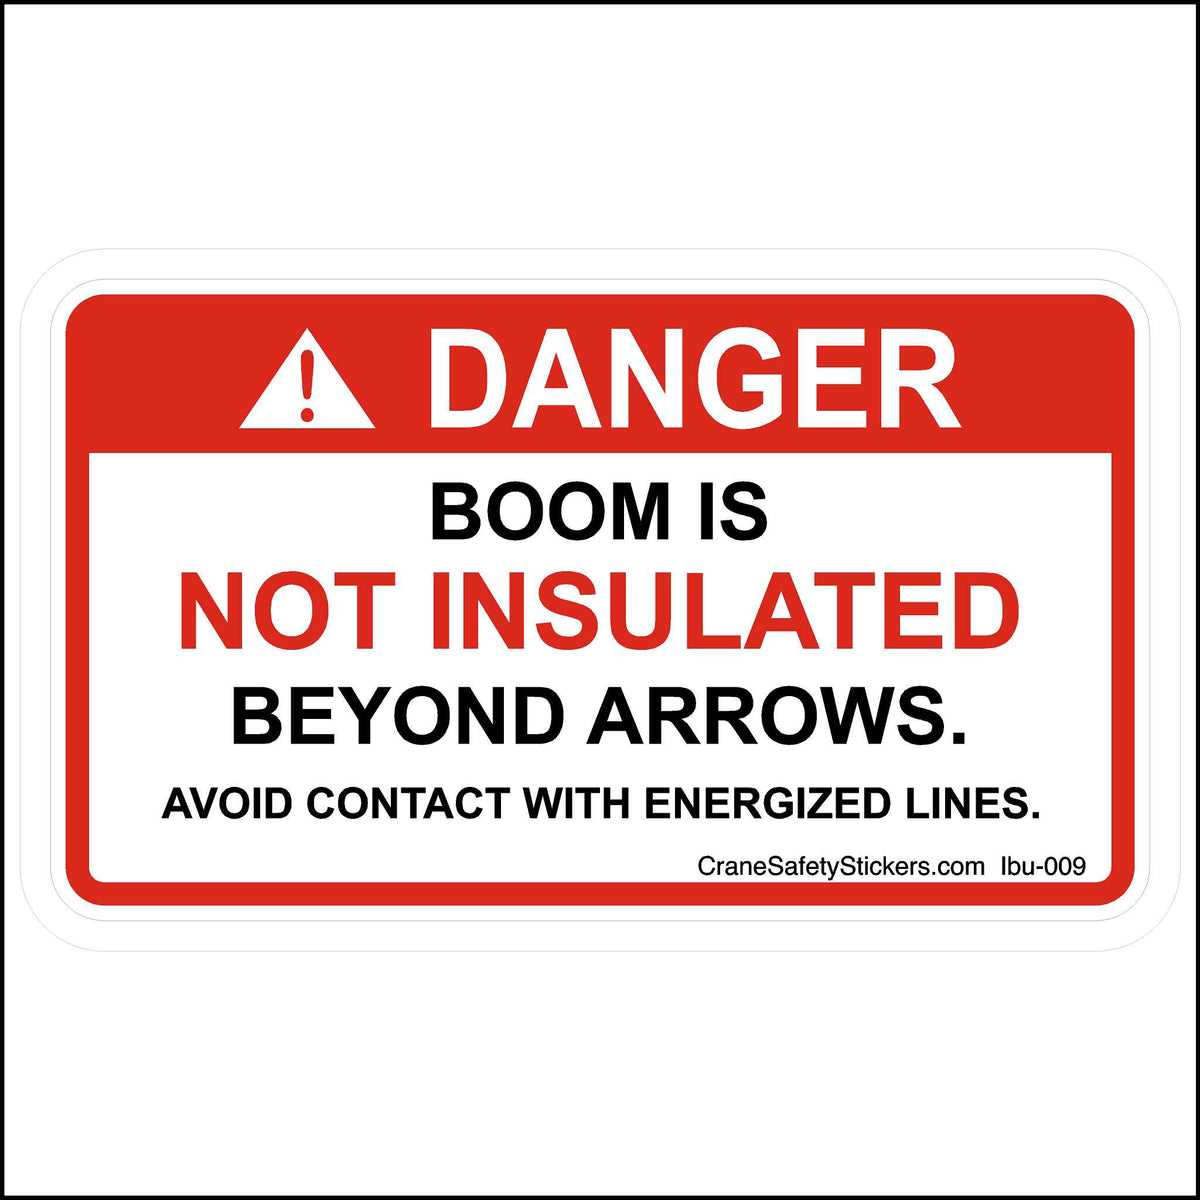 This Boom Is Not Insulated Beyond Arrows Sticker for Bucket Trucks is printed with. BOOM IS NOT INSULATED BEYOND ARROWS. AVOID CONTACT WITH ENERGIZED LINES.